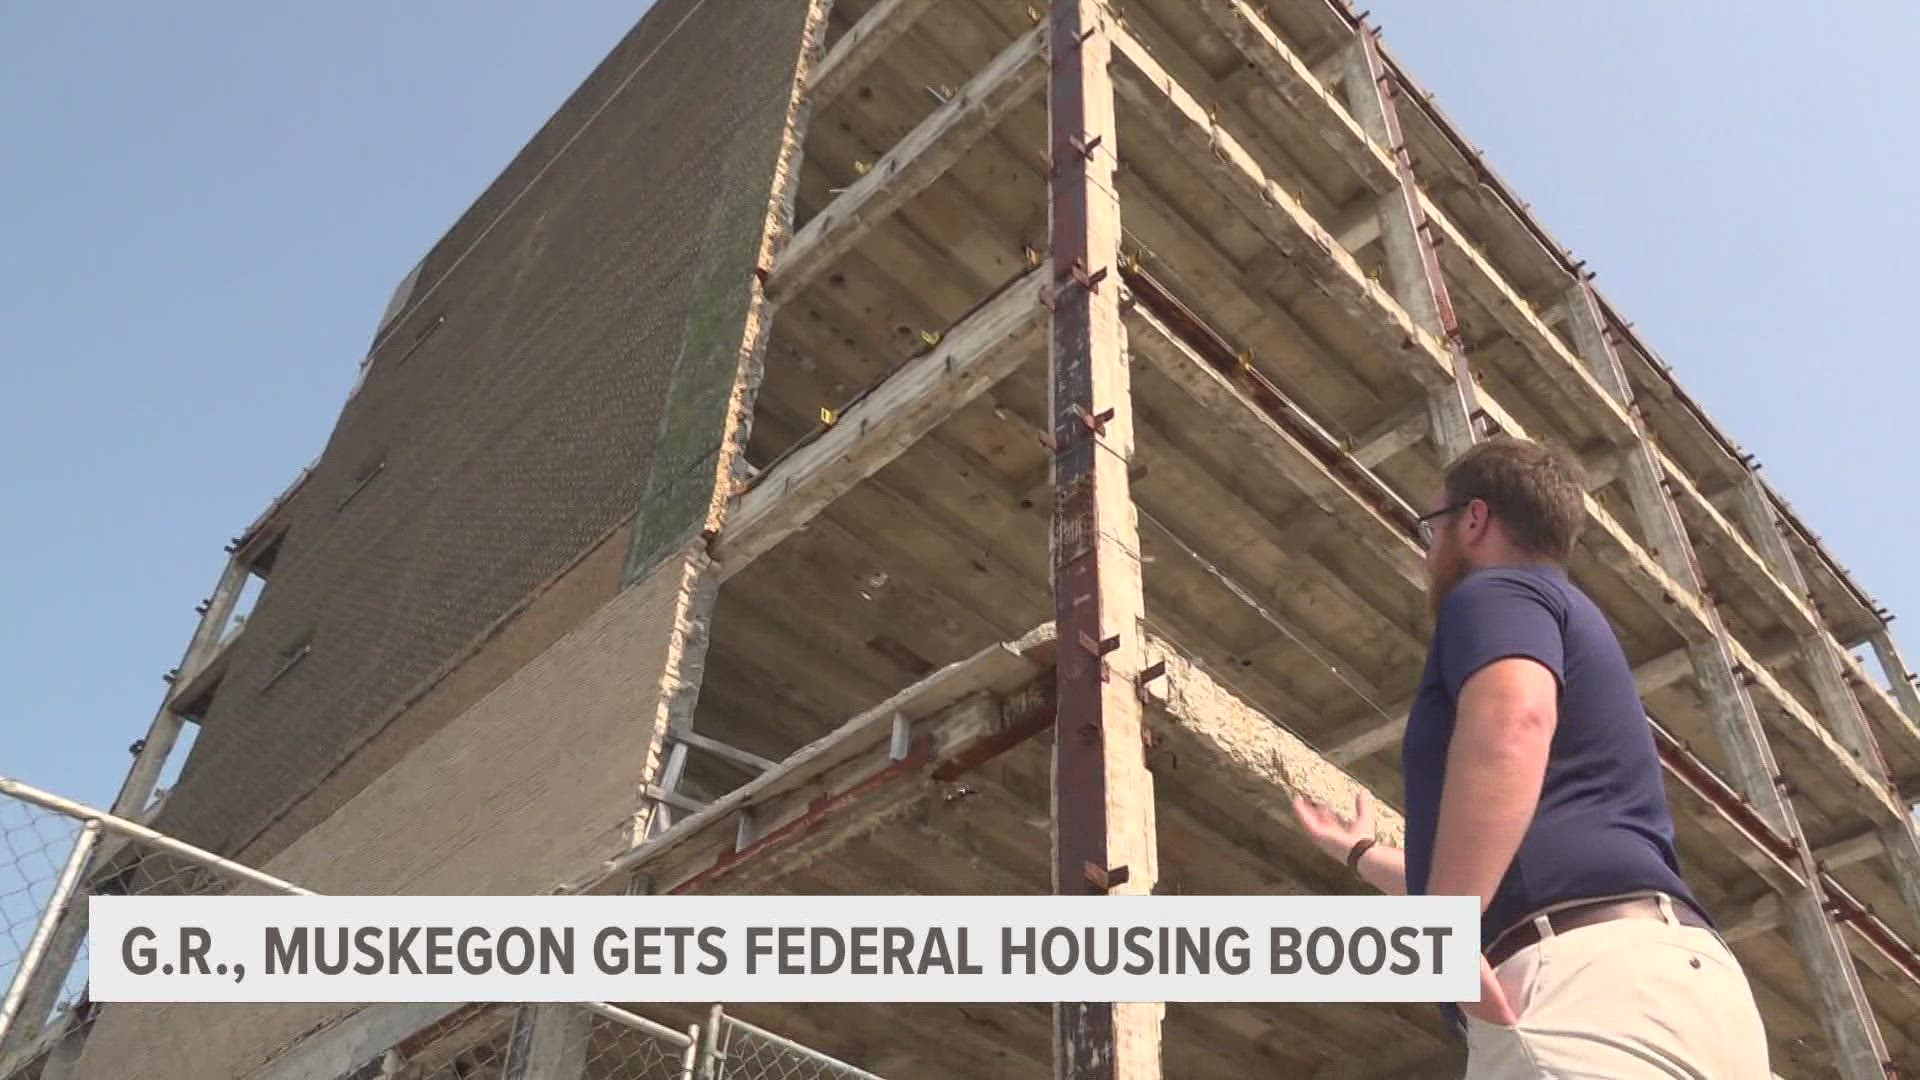 Our state was just awarded millions in federal grants. Muskegon and Grand Rapids are planning to use the funds on more housing.